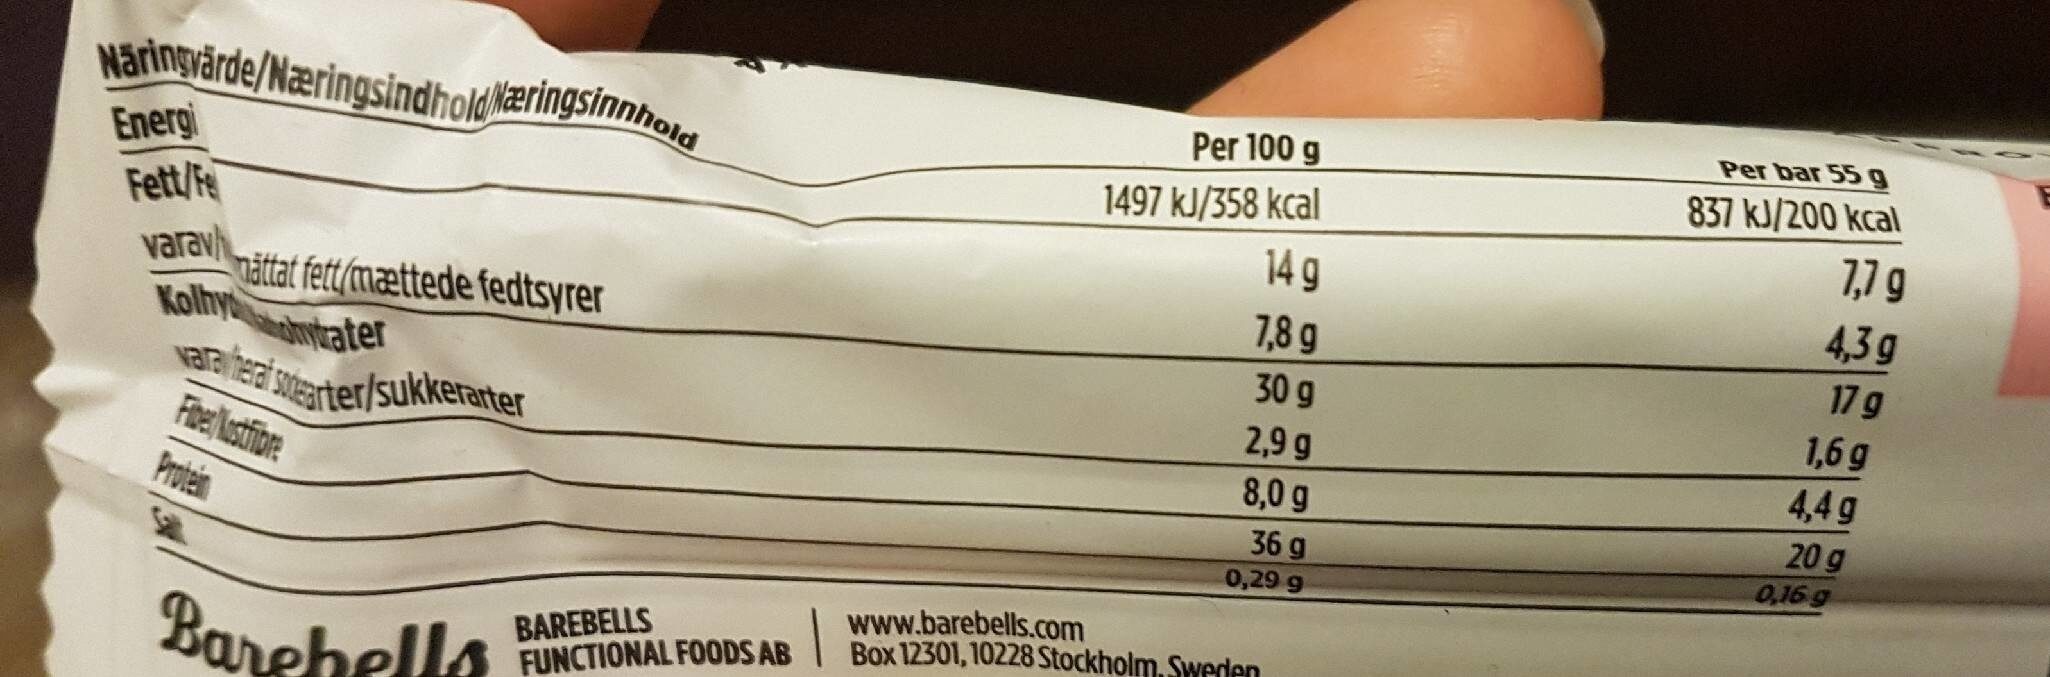 Strawberry & white chocolate protein bar - Nutrition facts - fr